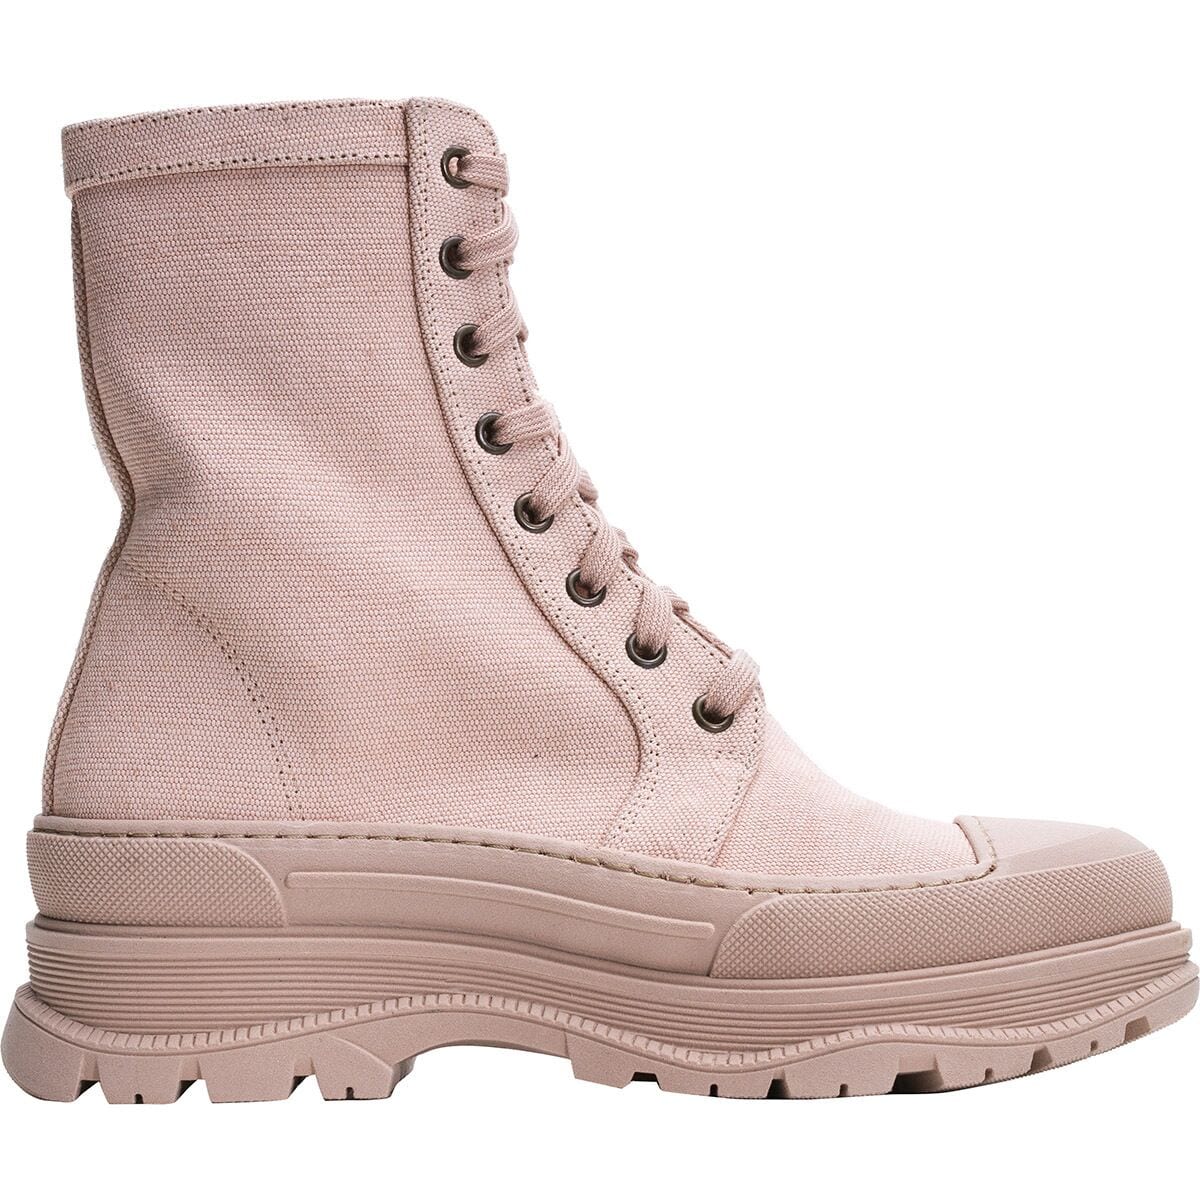 Camp Out Canvas Lace Up Boot - Women